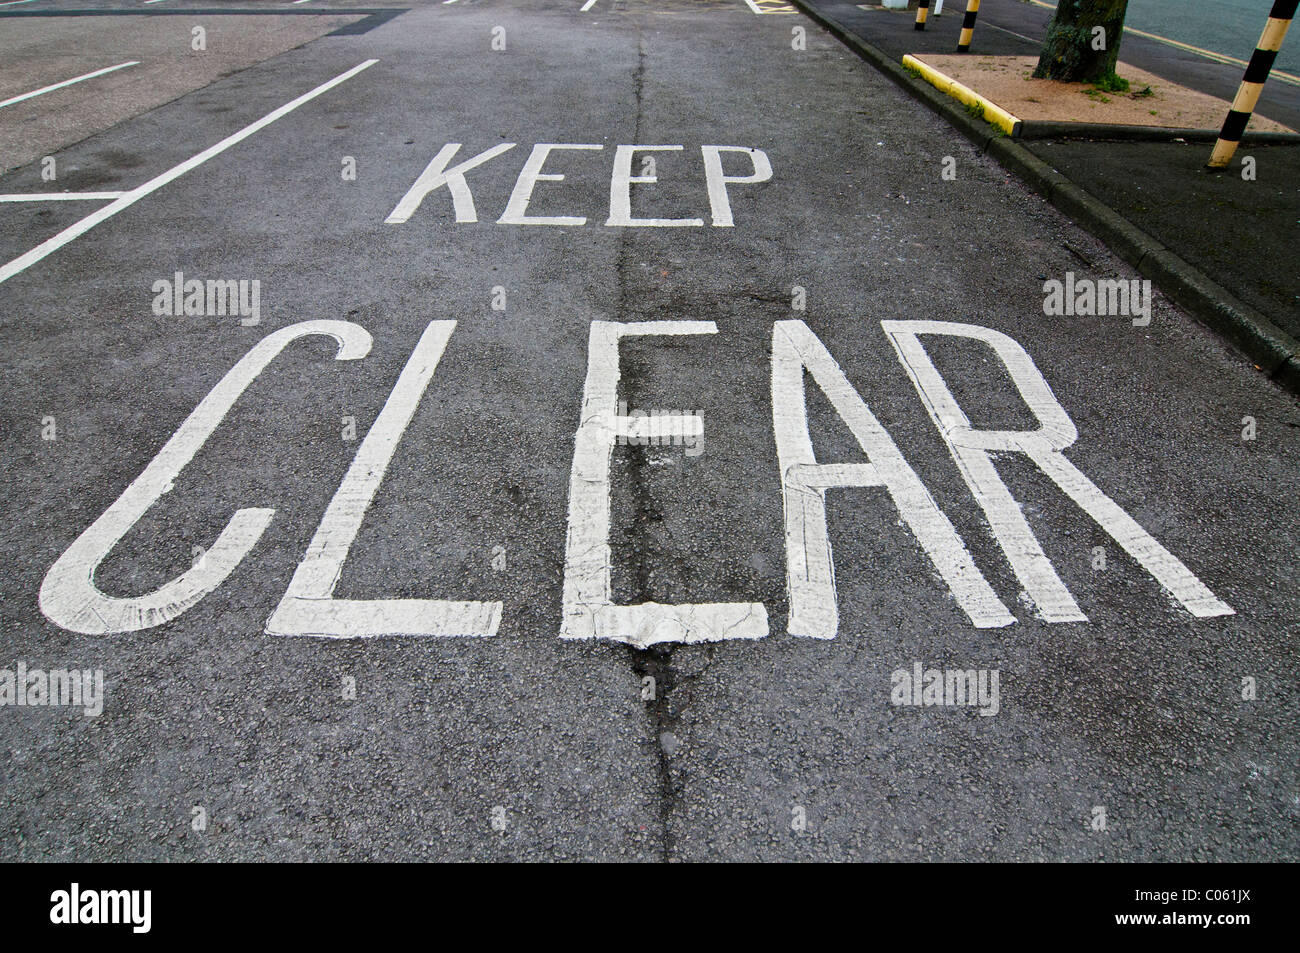 'Keep Clear' road sign Stock Photo